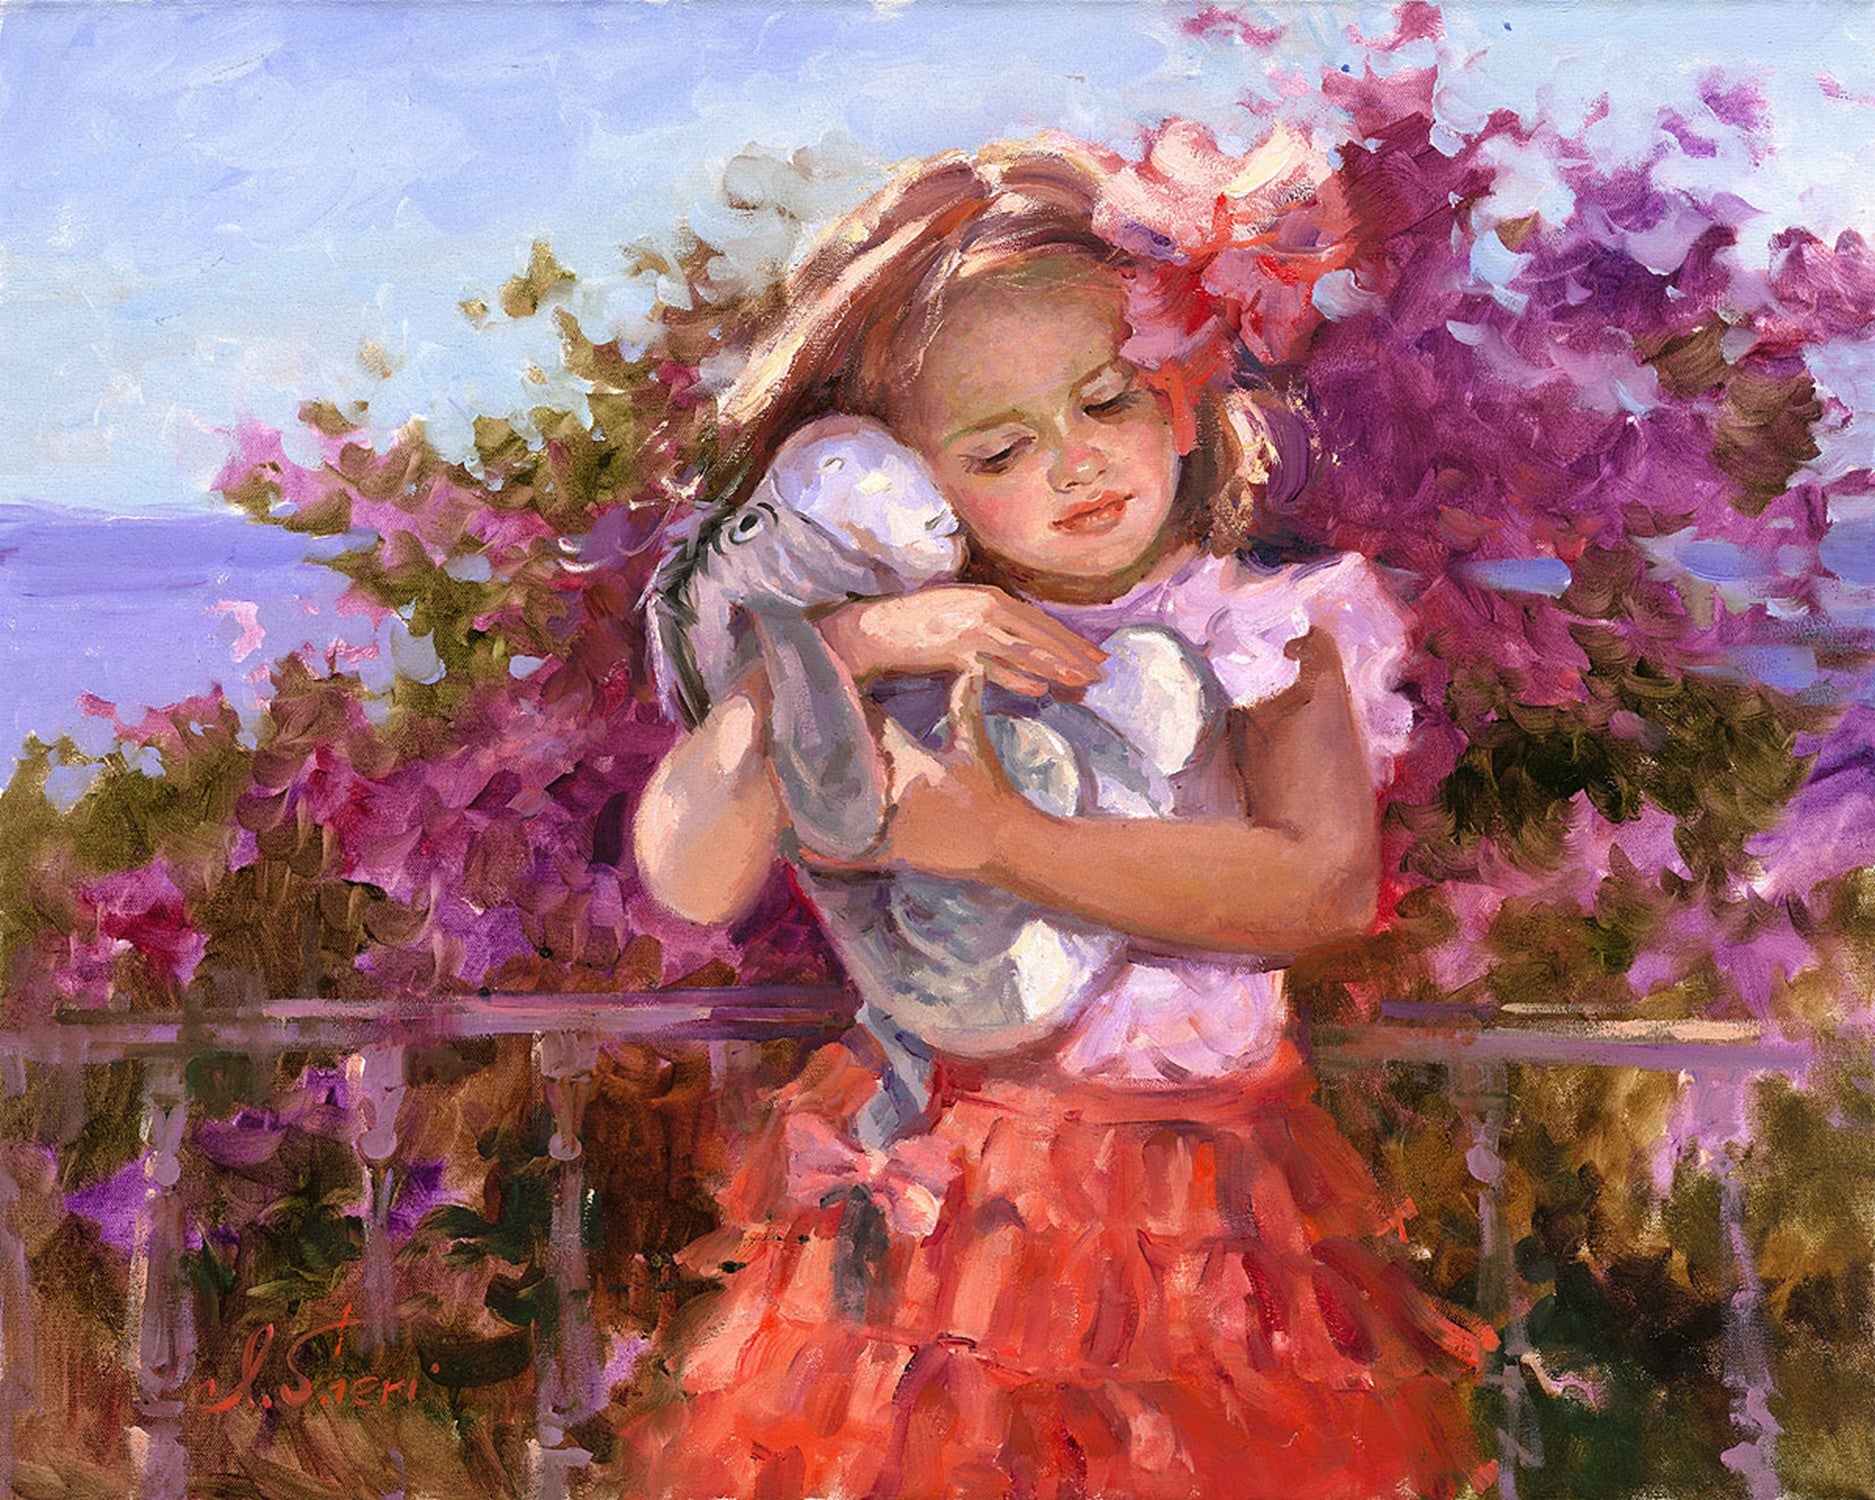 Eeyore's Sunny Day by Irene Sheri inspired by Winnie The Pooh